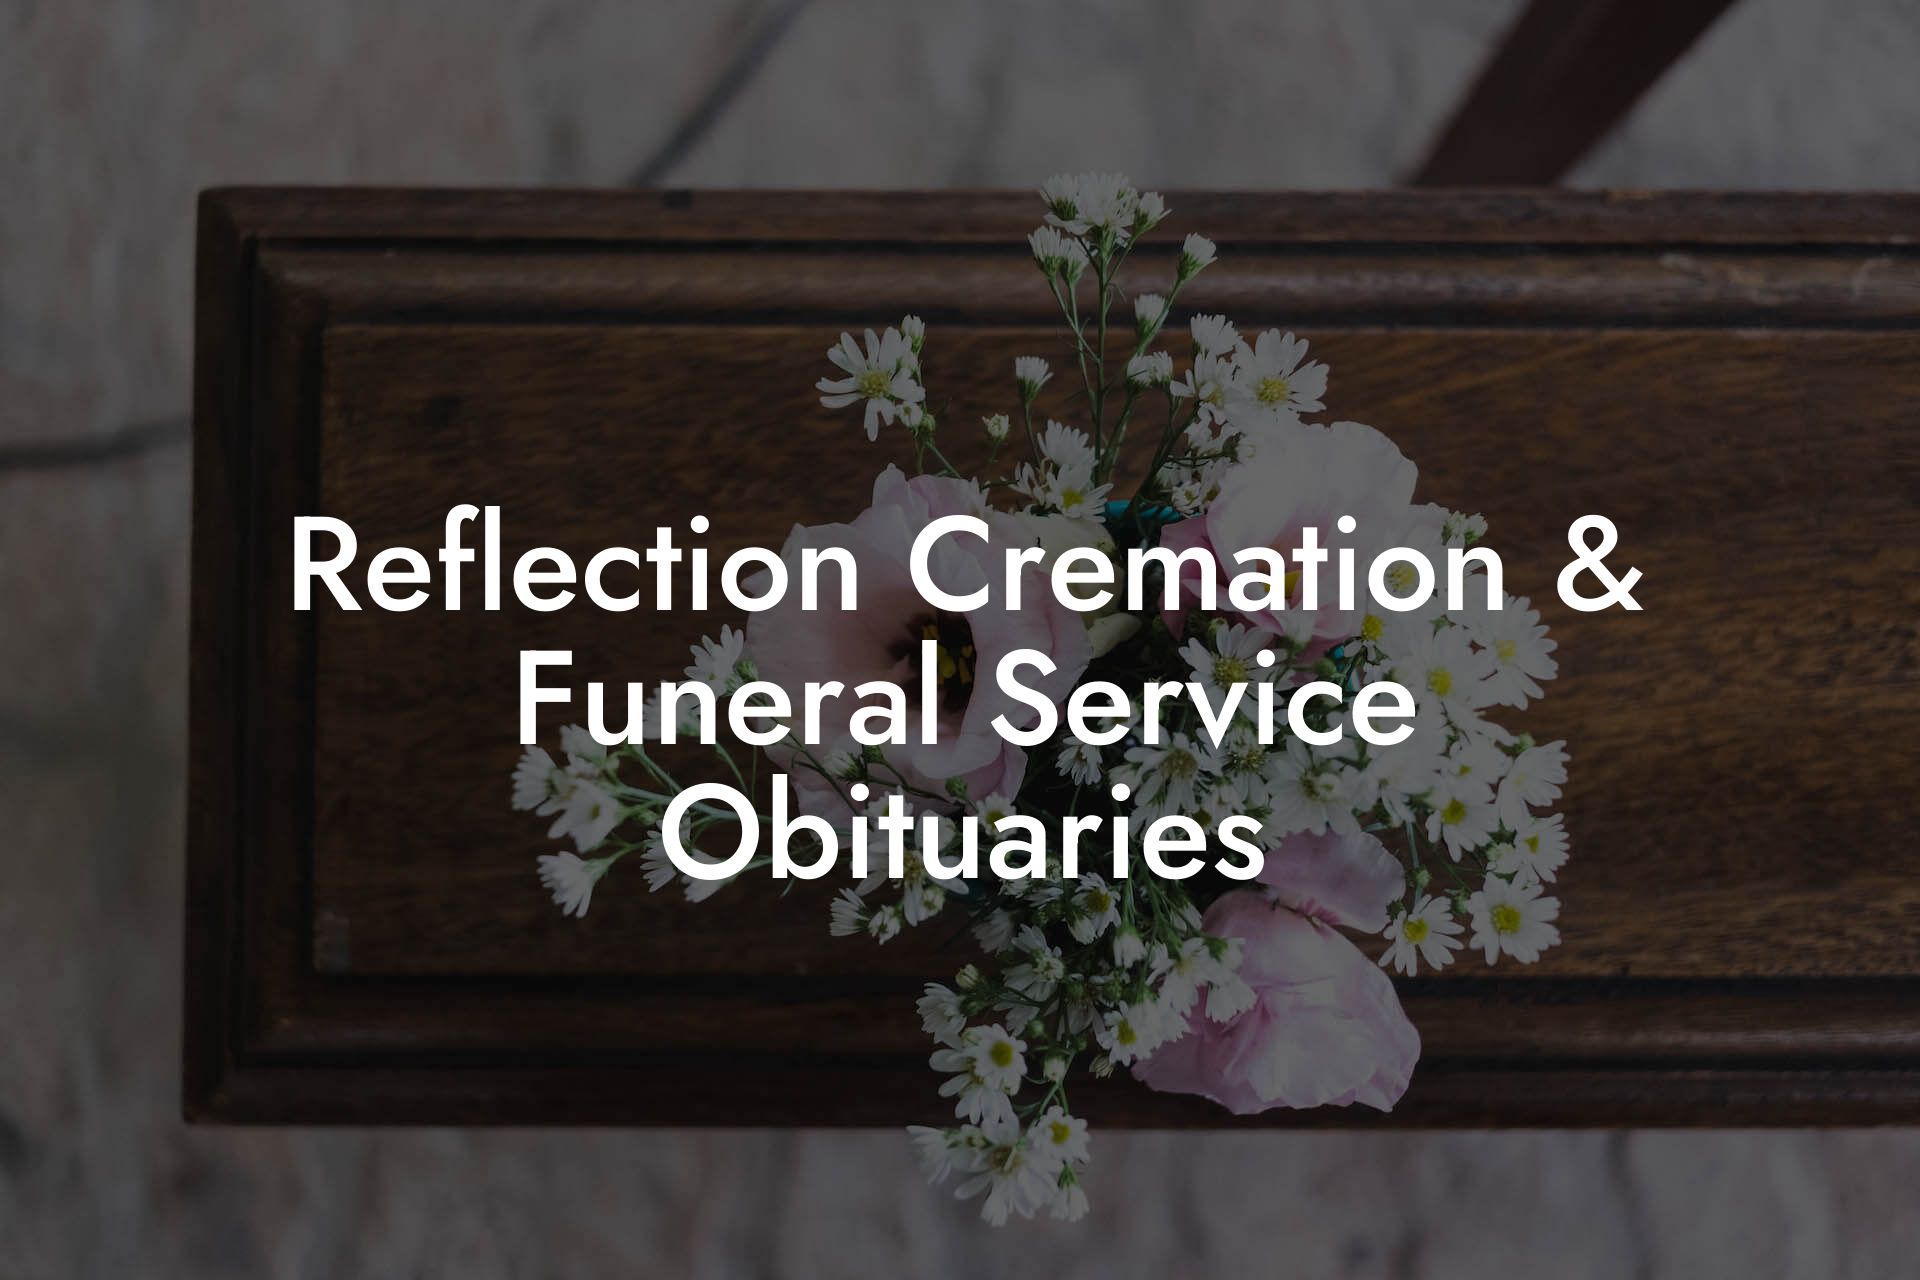 Reflection Cremation & Funeral Service Obituaries